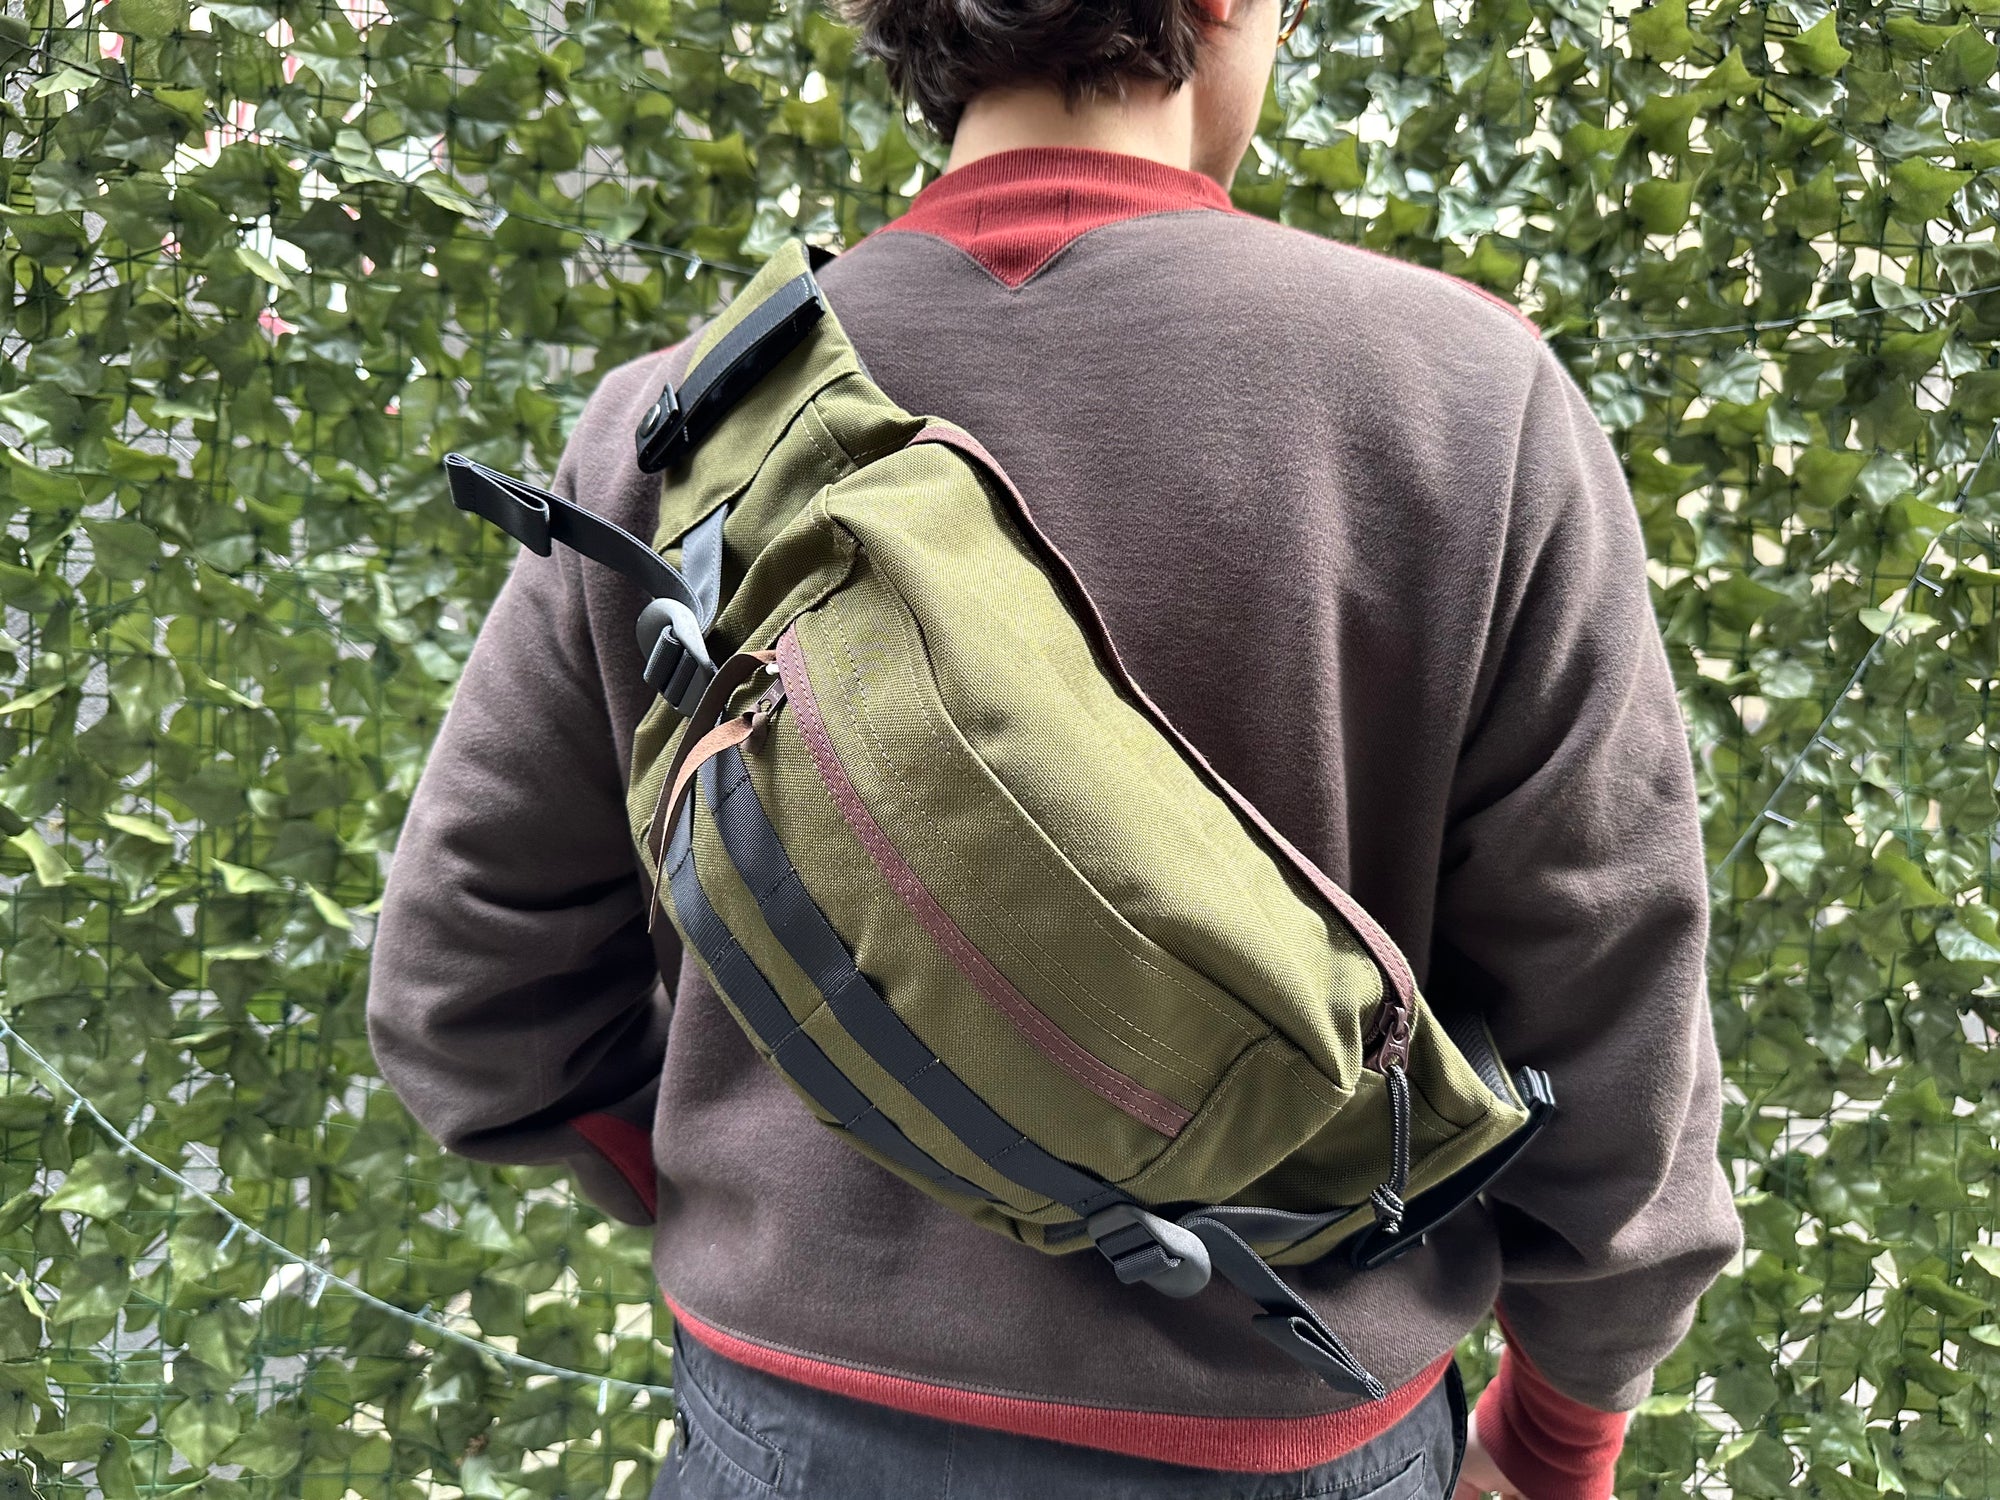 Ultima Thule by Freewheelers "HALF DOME" Fanny Pack (Olive)